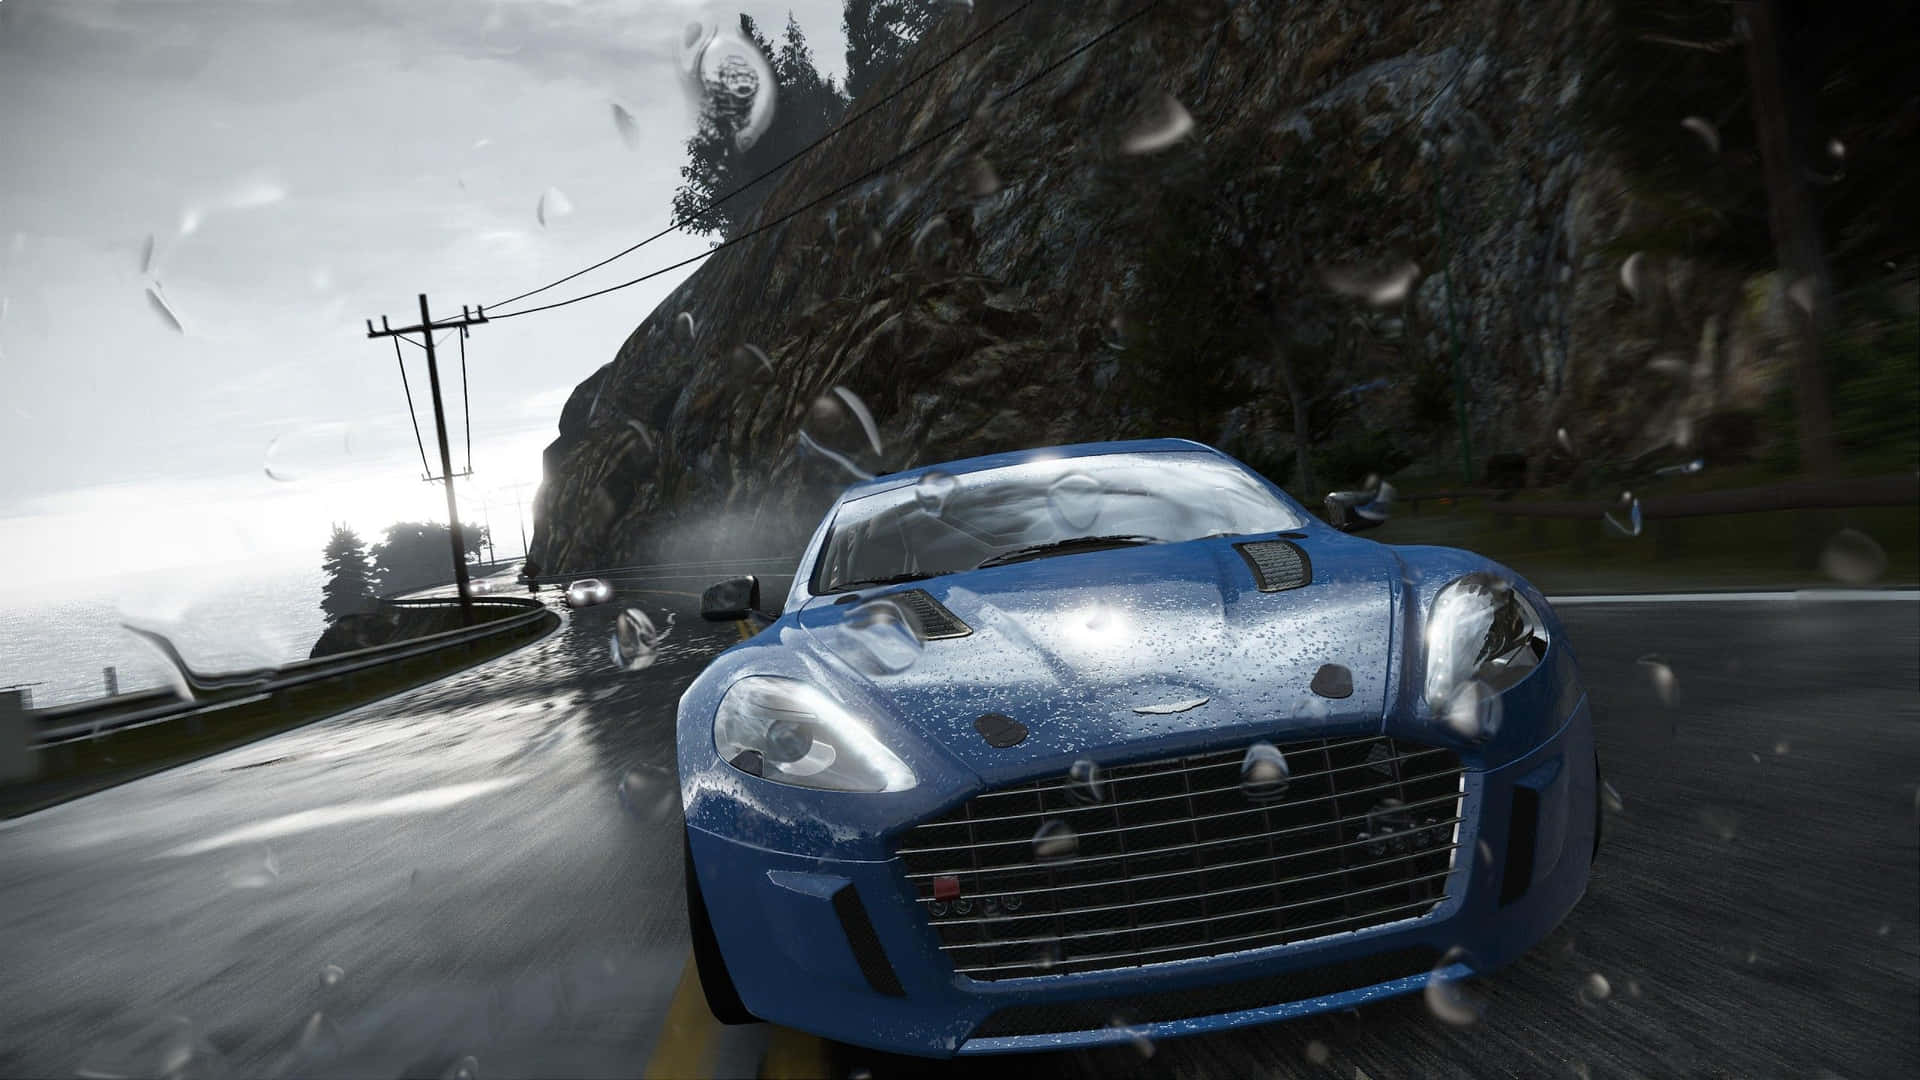 Captivating Racing Game Action Wallpaper